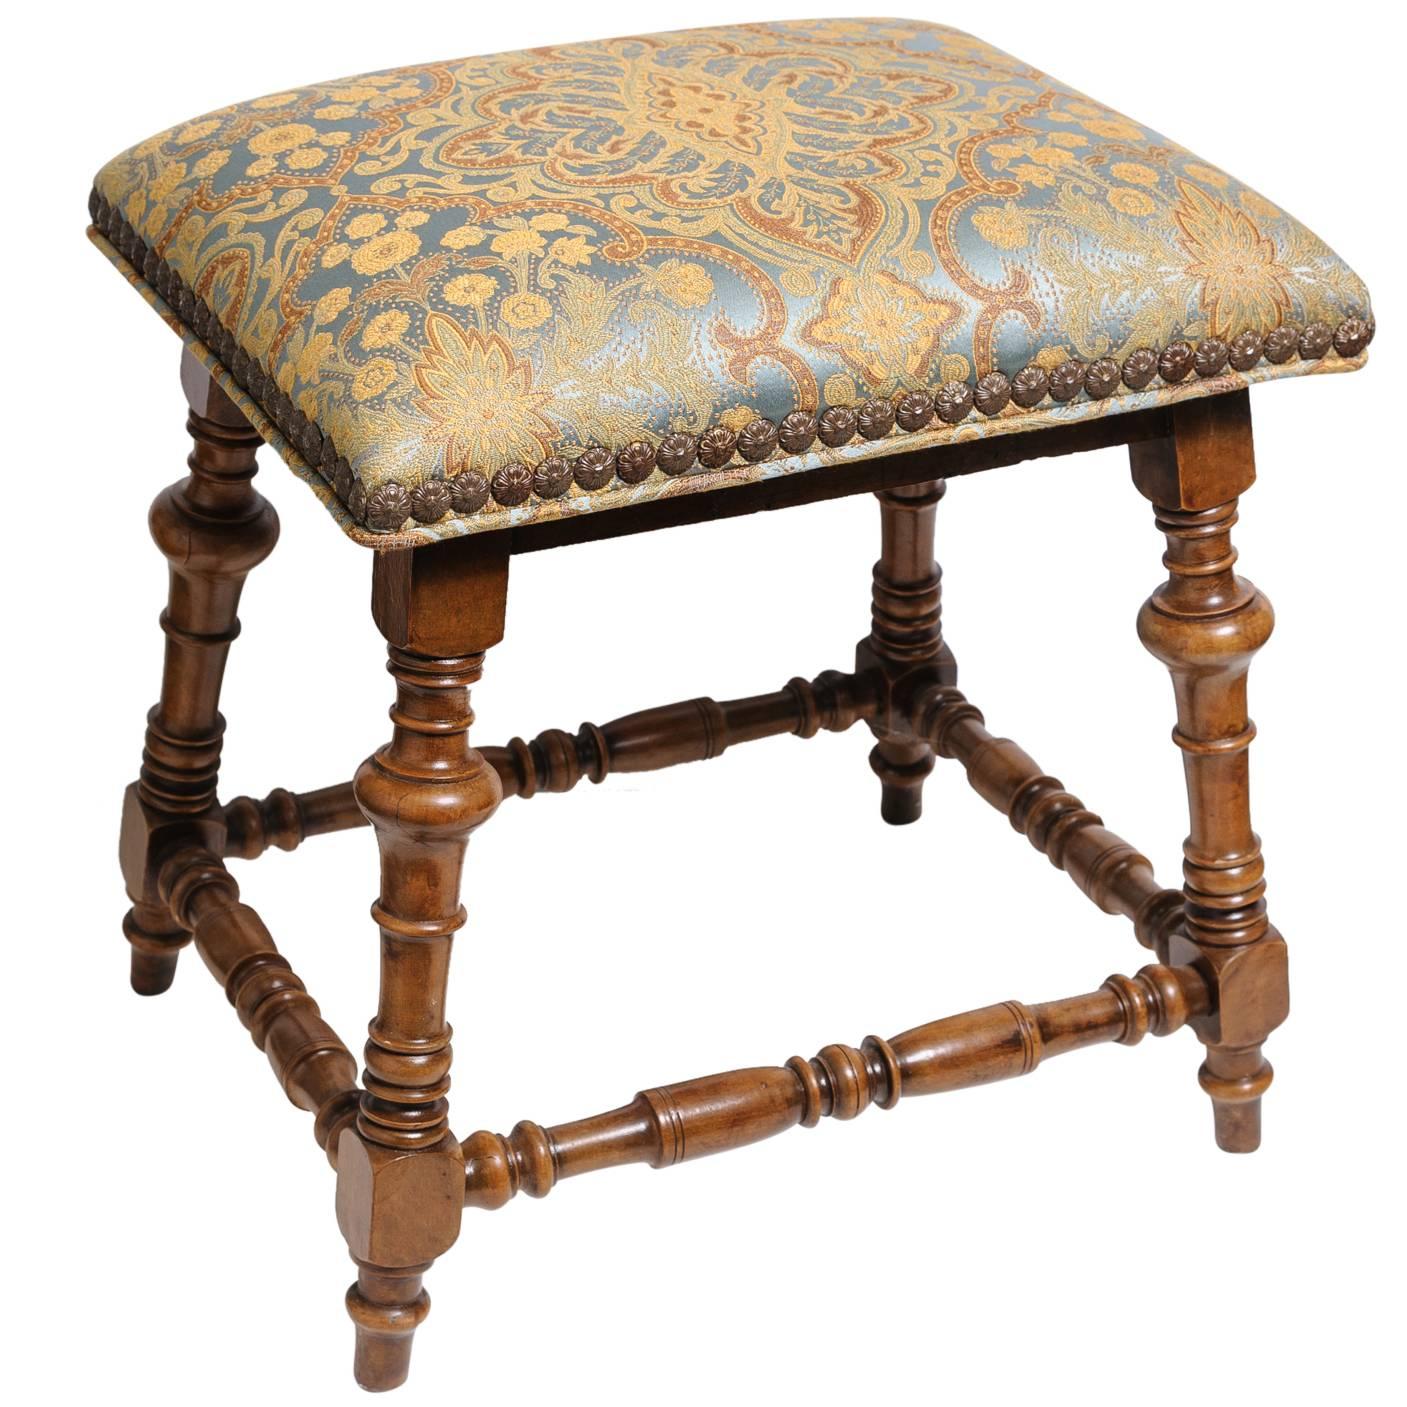 Jacobean Style Stool with Gold and Blue Damask Fabric For Sale